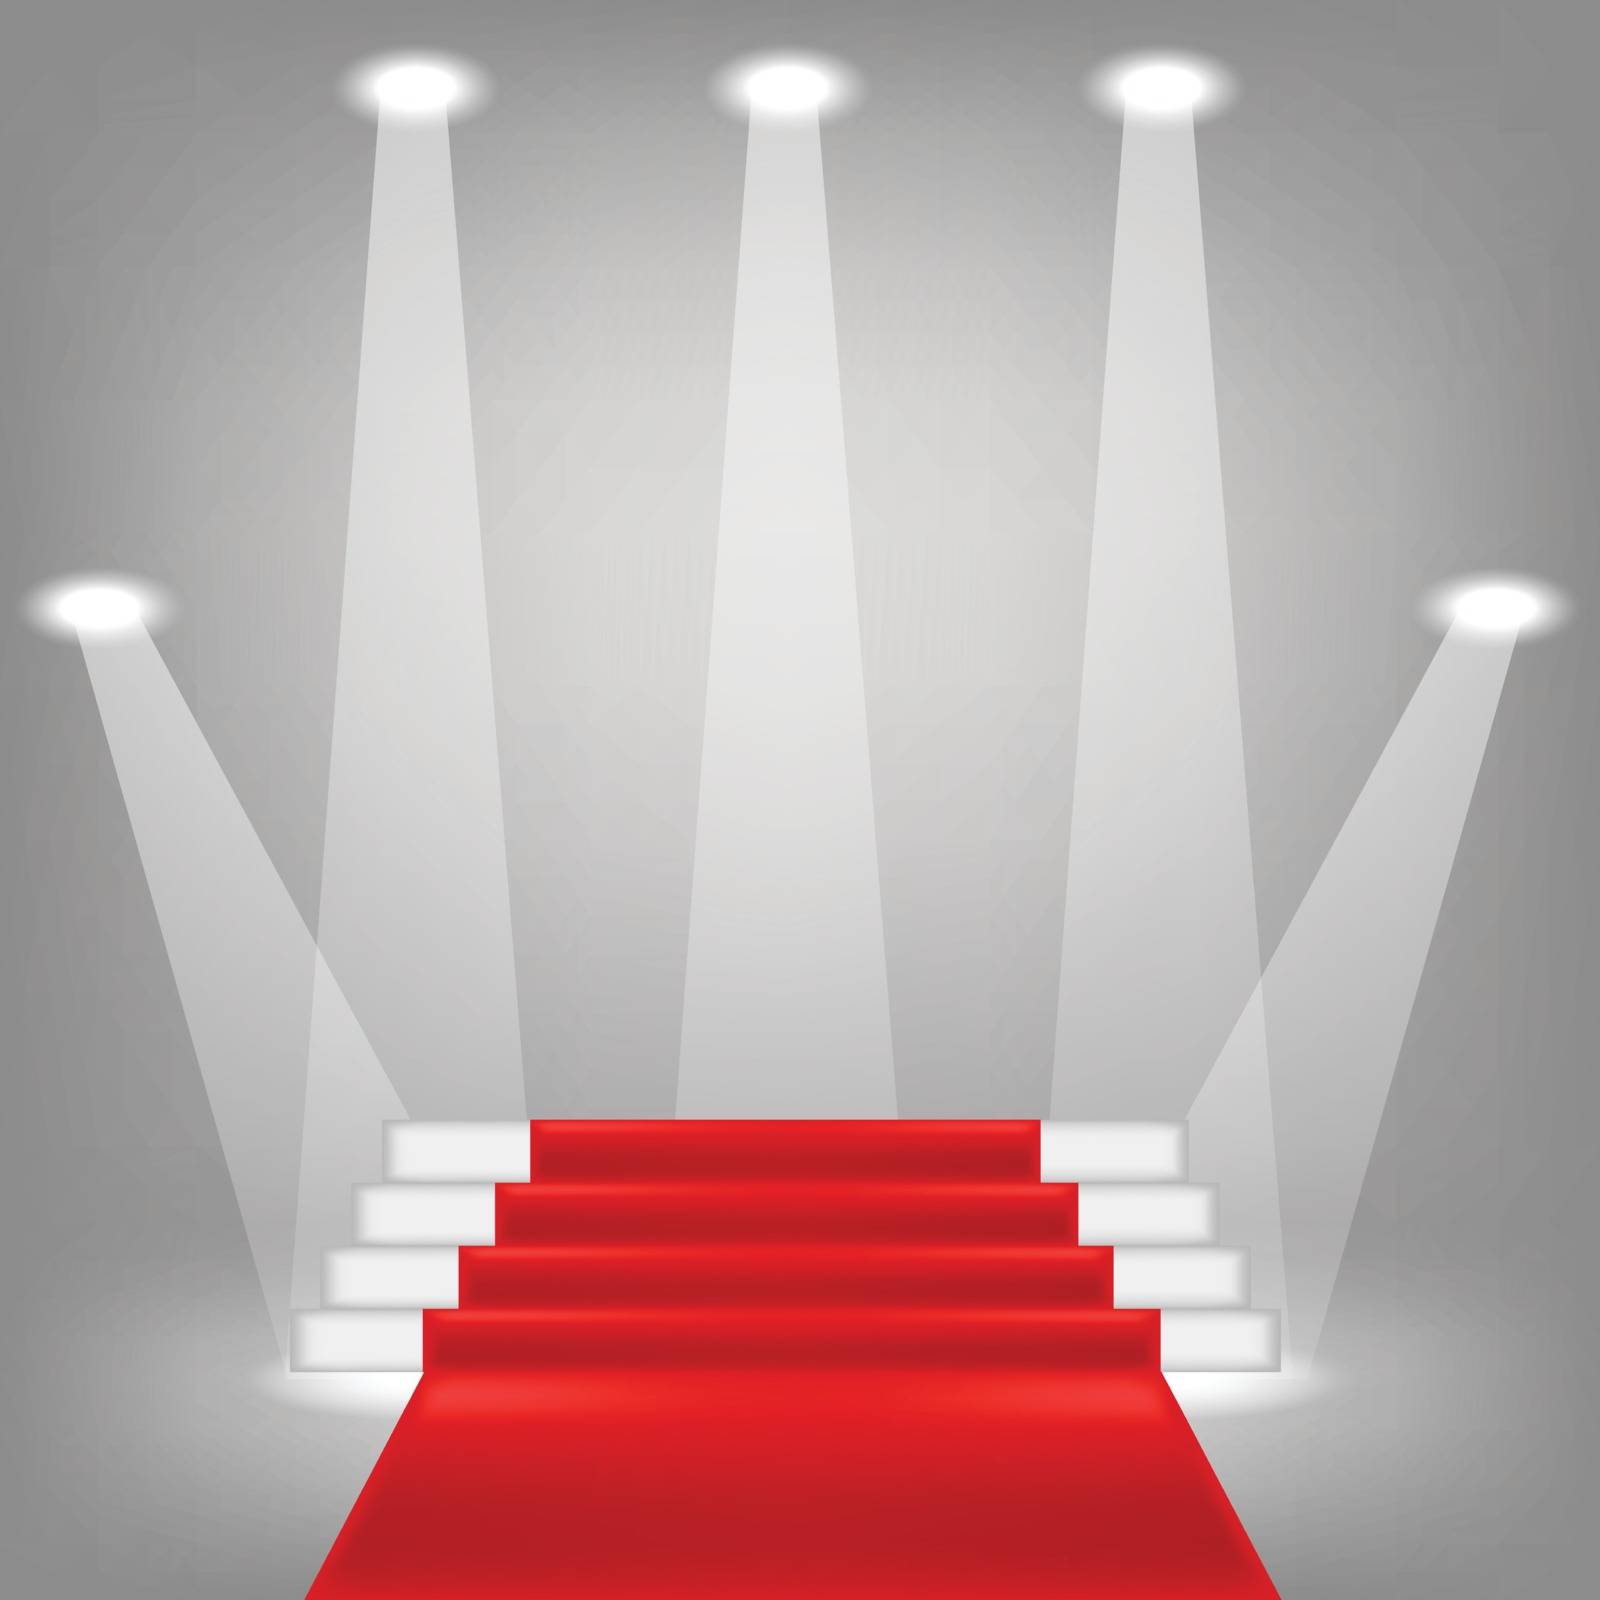 colorful illustration  with  red carpet on grey background